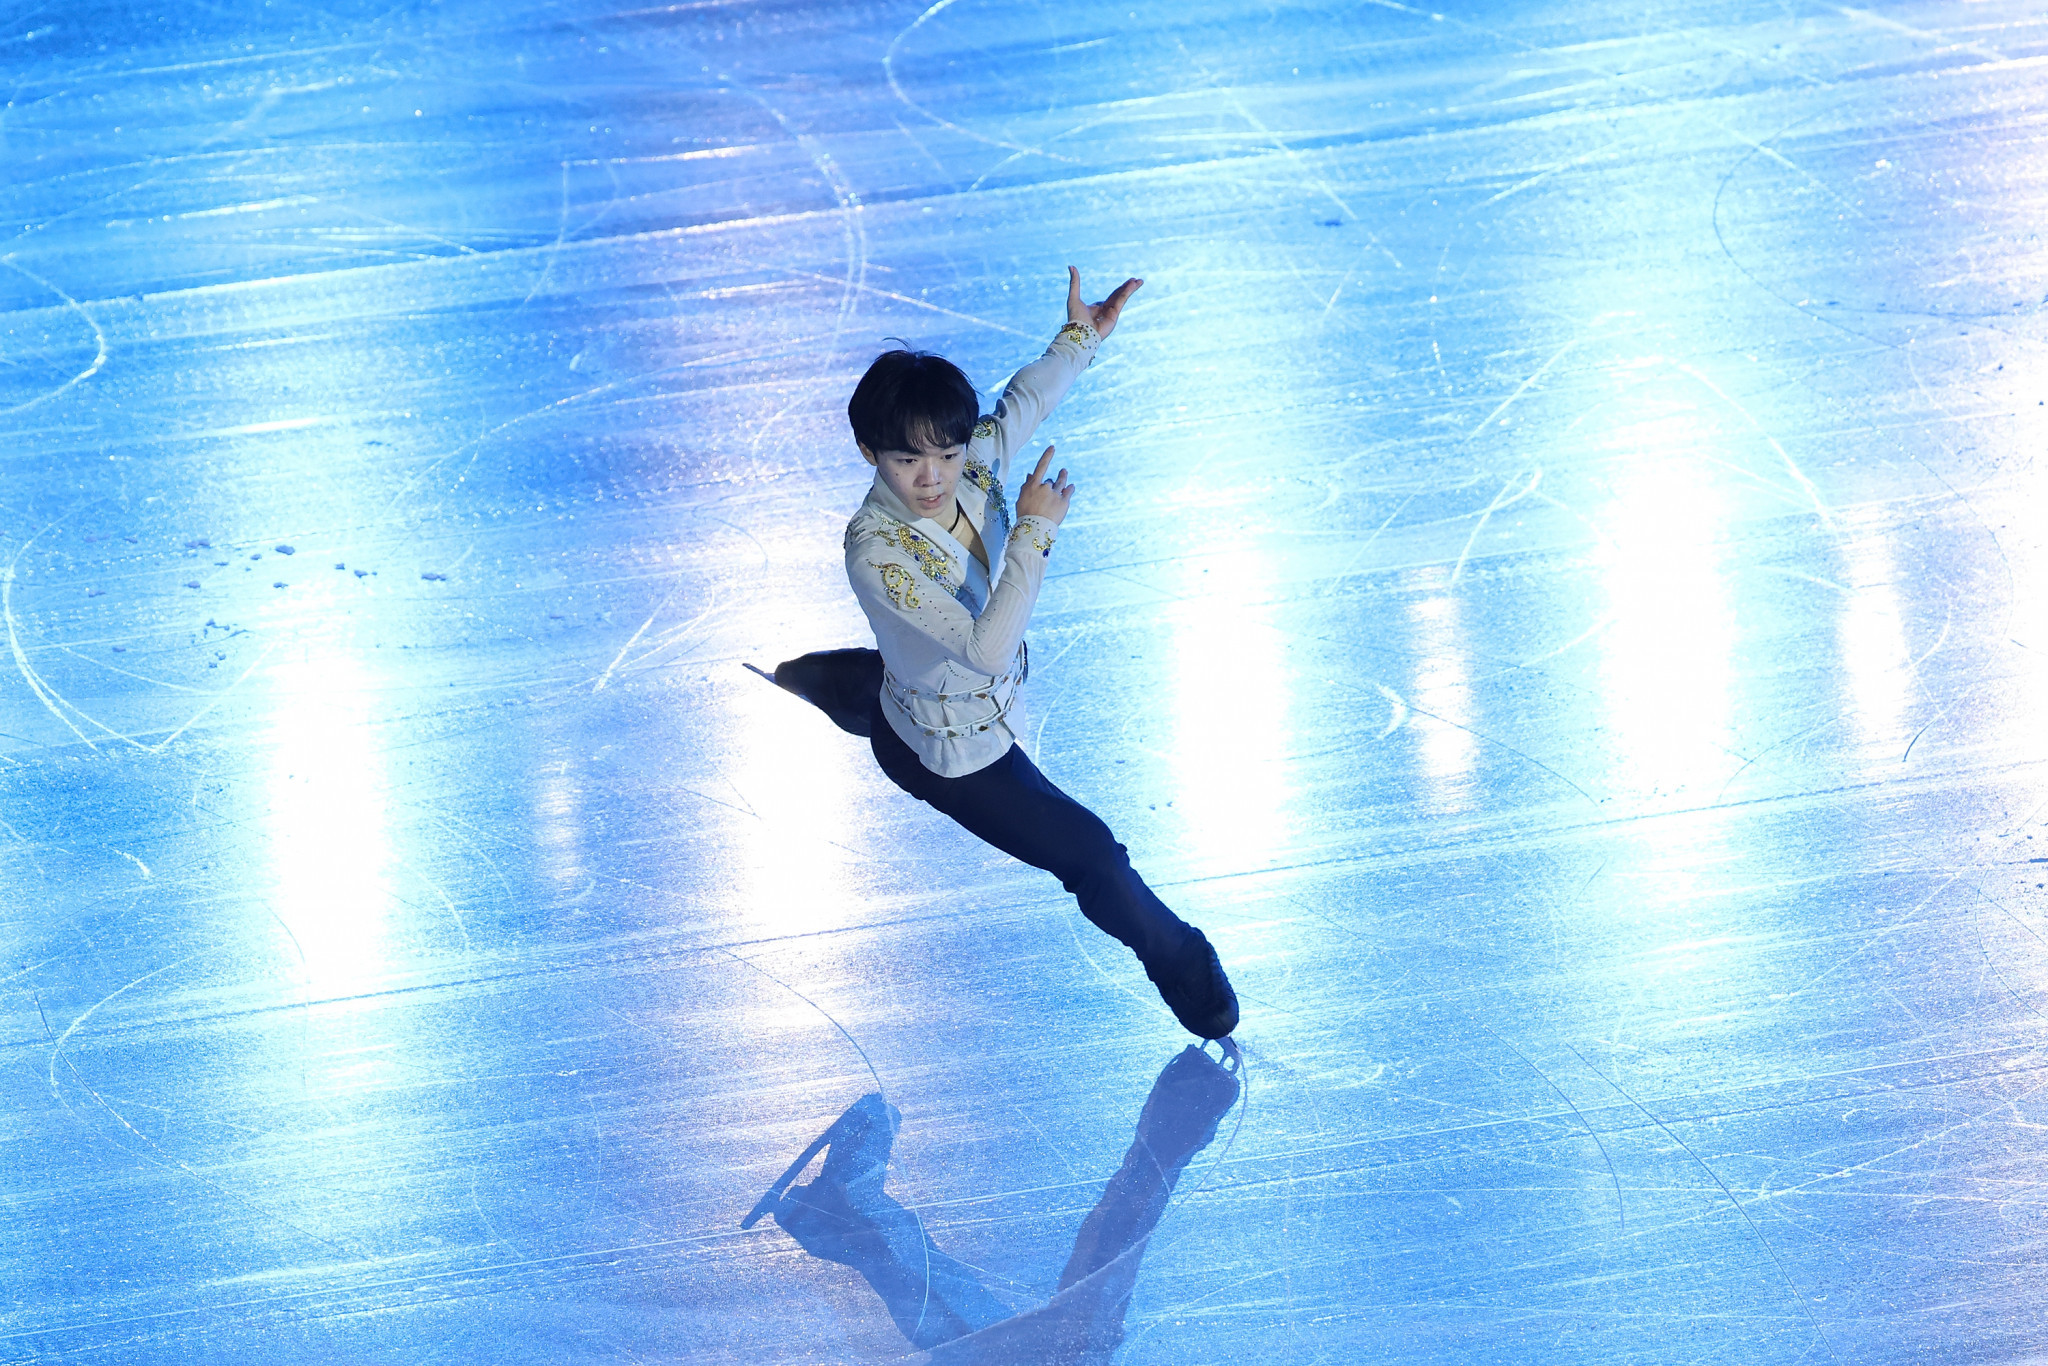 Yuma Kagiyama produced a sensational free skating routine to claim the title at the ISU Grand Prix of Italy ©Getty Images